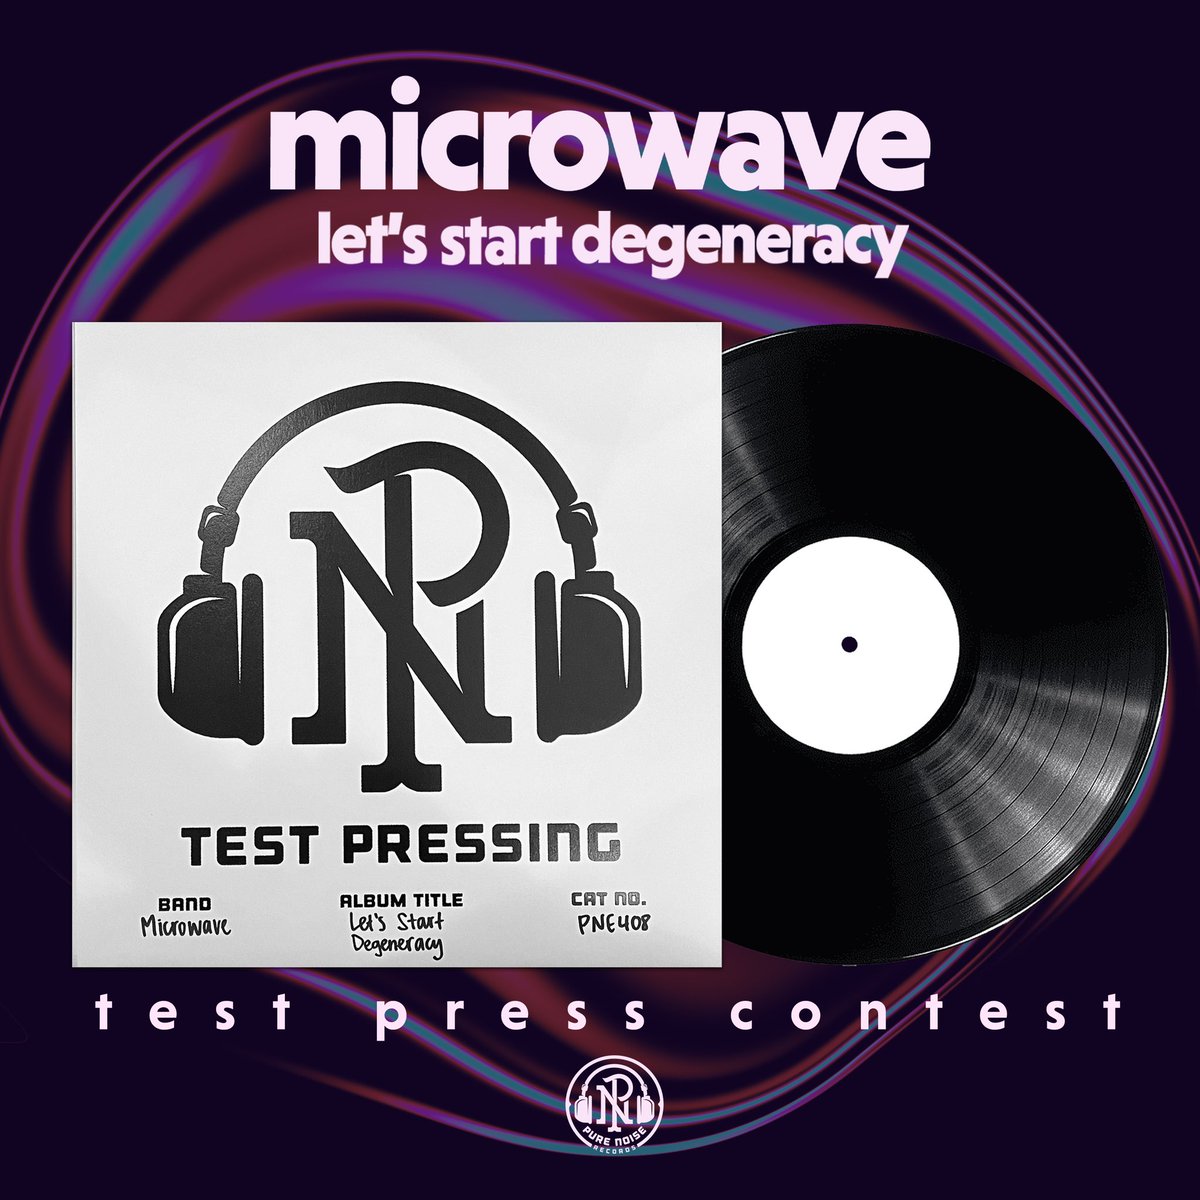 Enter to win a @microwaveatl ‘Let’s Start Degeneracy’ test press! Hit the link below to enter, winner will be chosen Tuesday, May 7th. toneden.io/purenoiserecor…